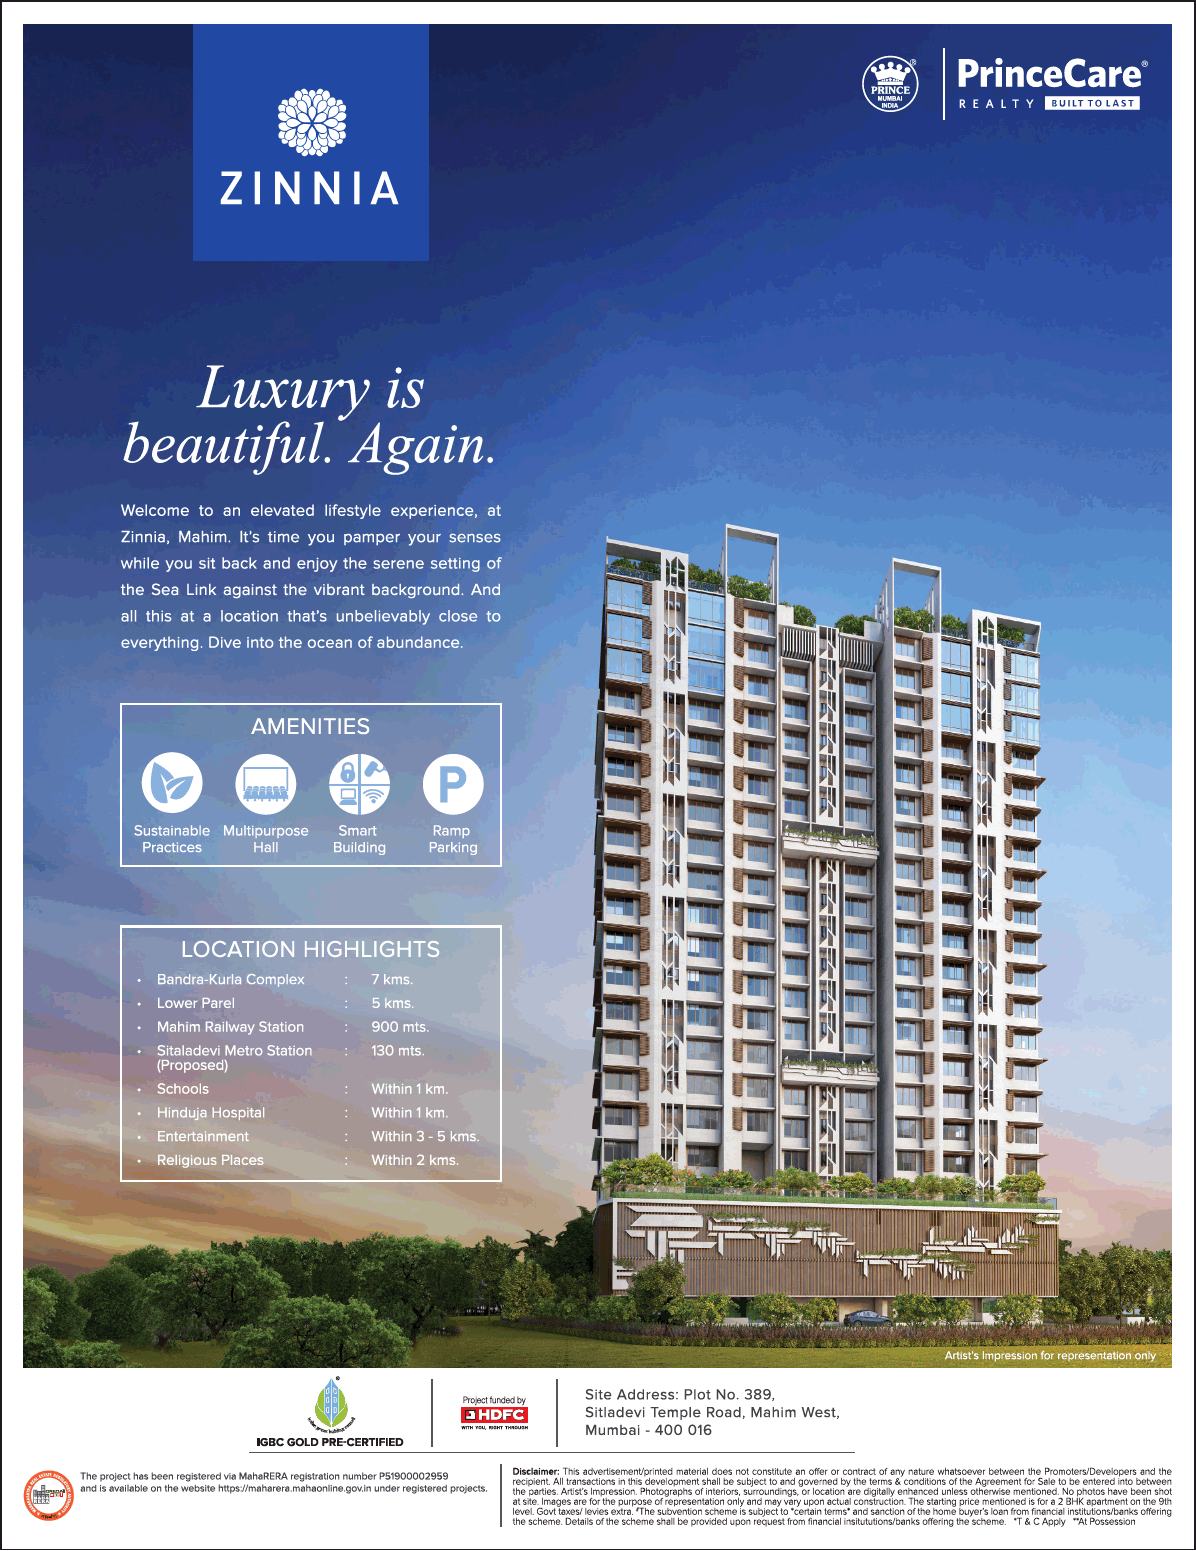 Dive into the ocean of abundance by residing at Prince Care Zinnia in Mumbai Update